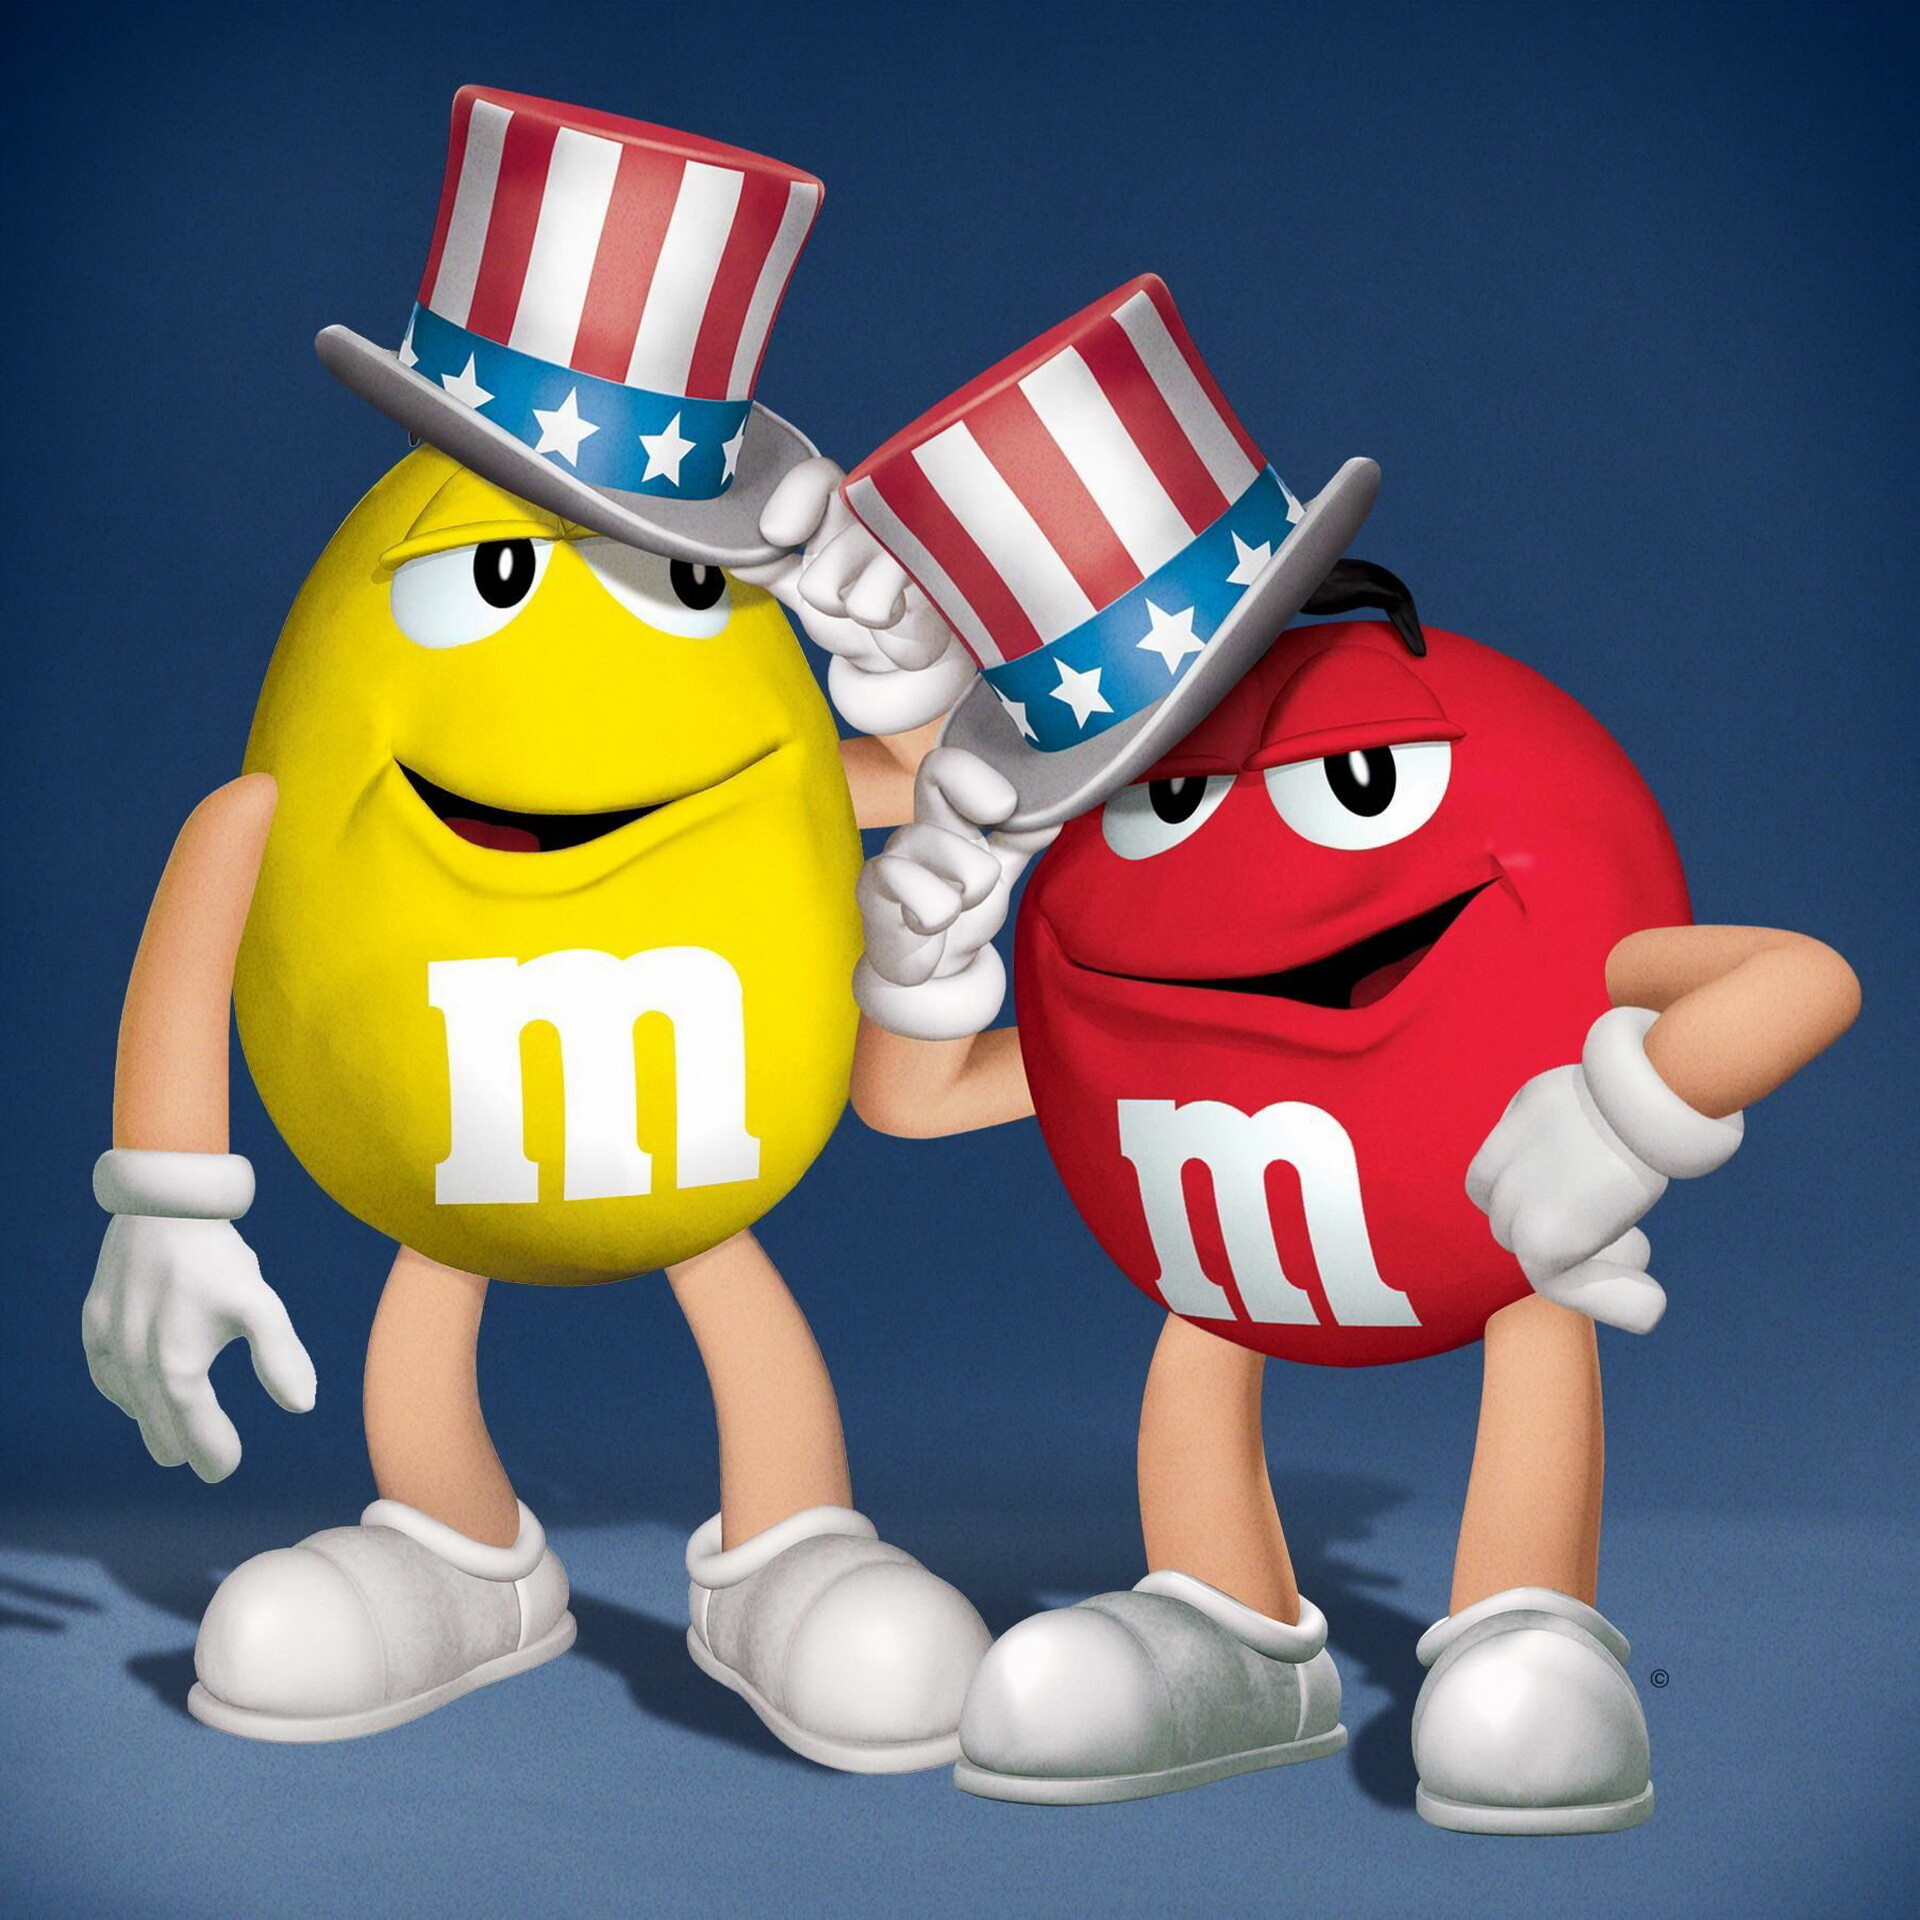 M&M’s: Produced in different colors, some of which have changed over the years. 1920x1920 HD Wallpaper.